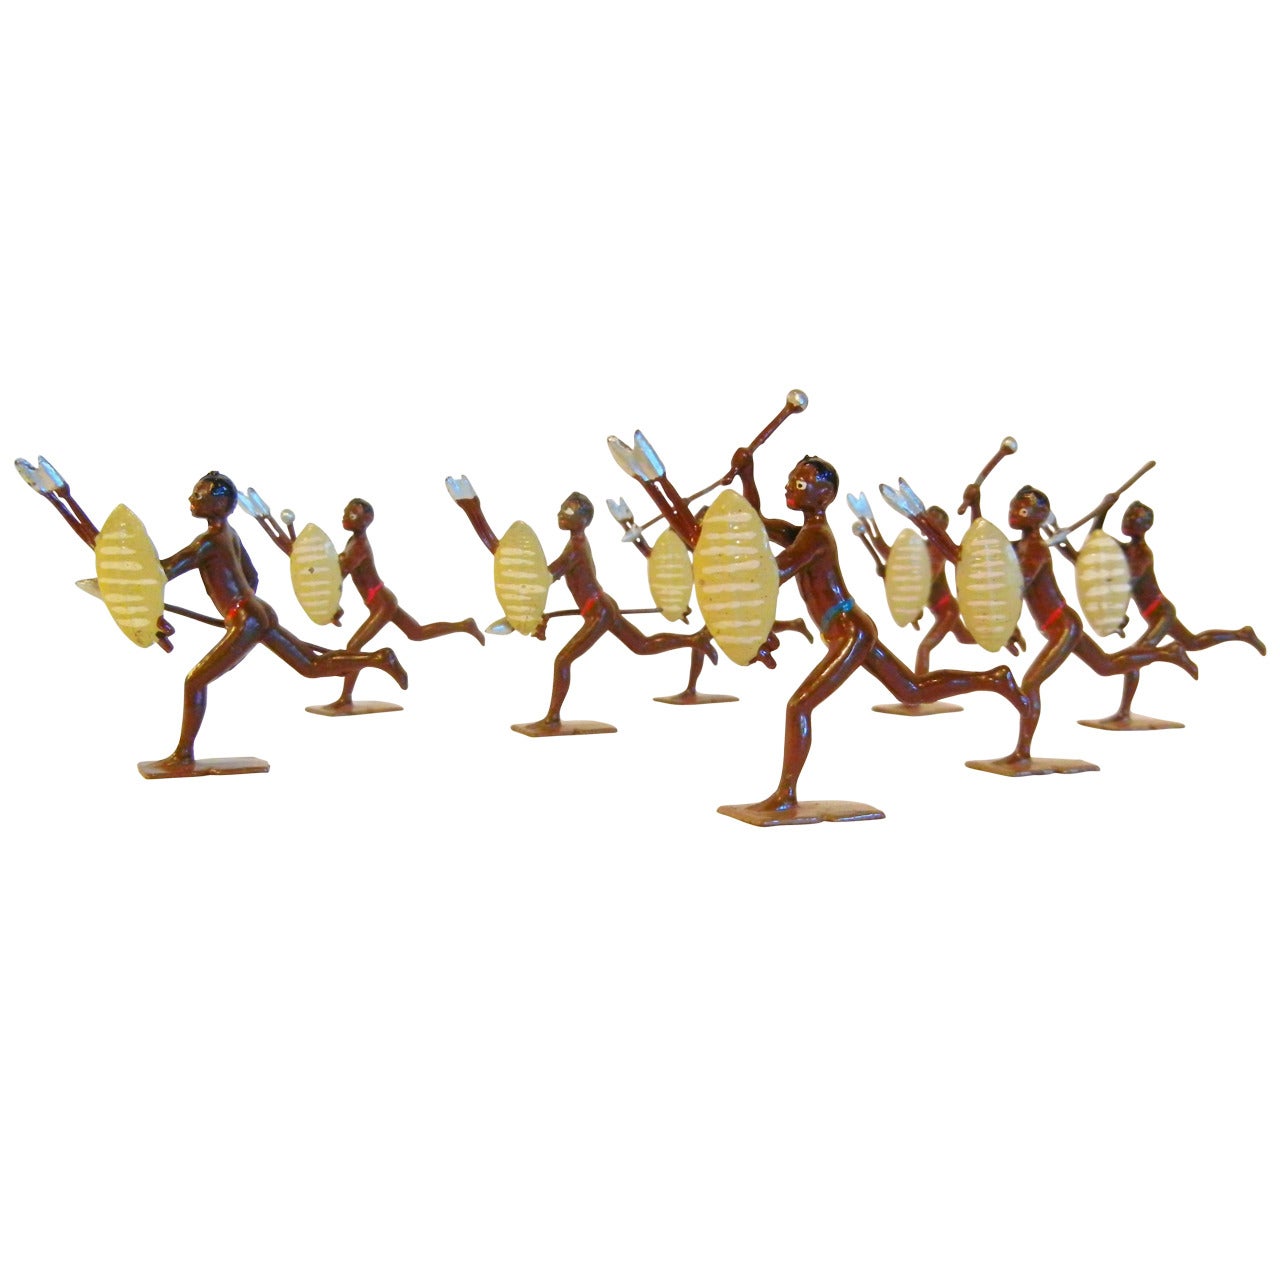 Zulus of Africa, Toy Soldiers by Britains Ltd., Set #147